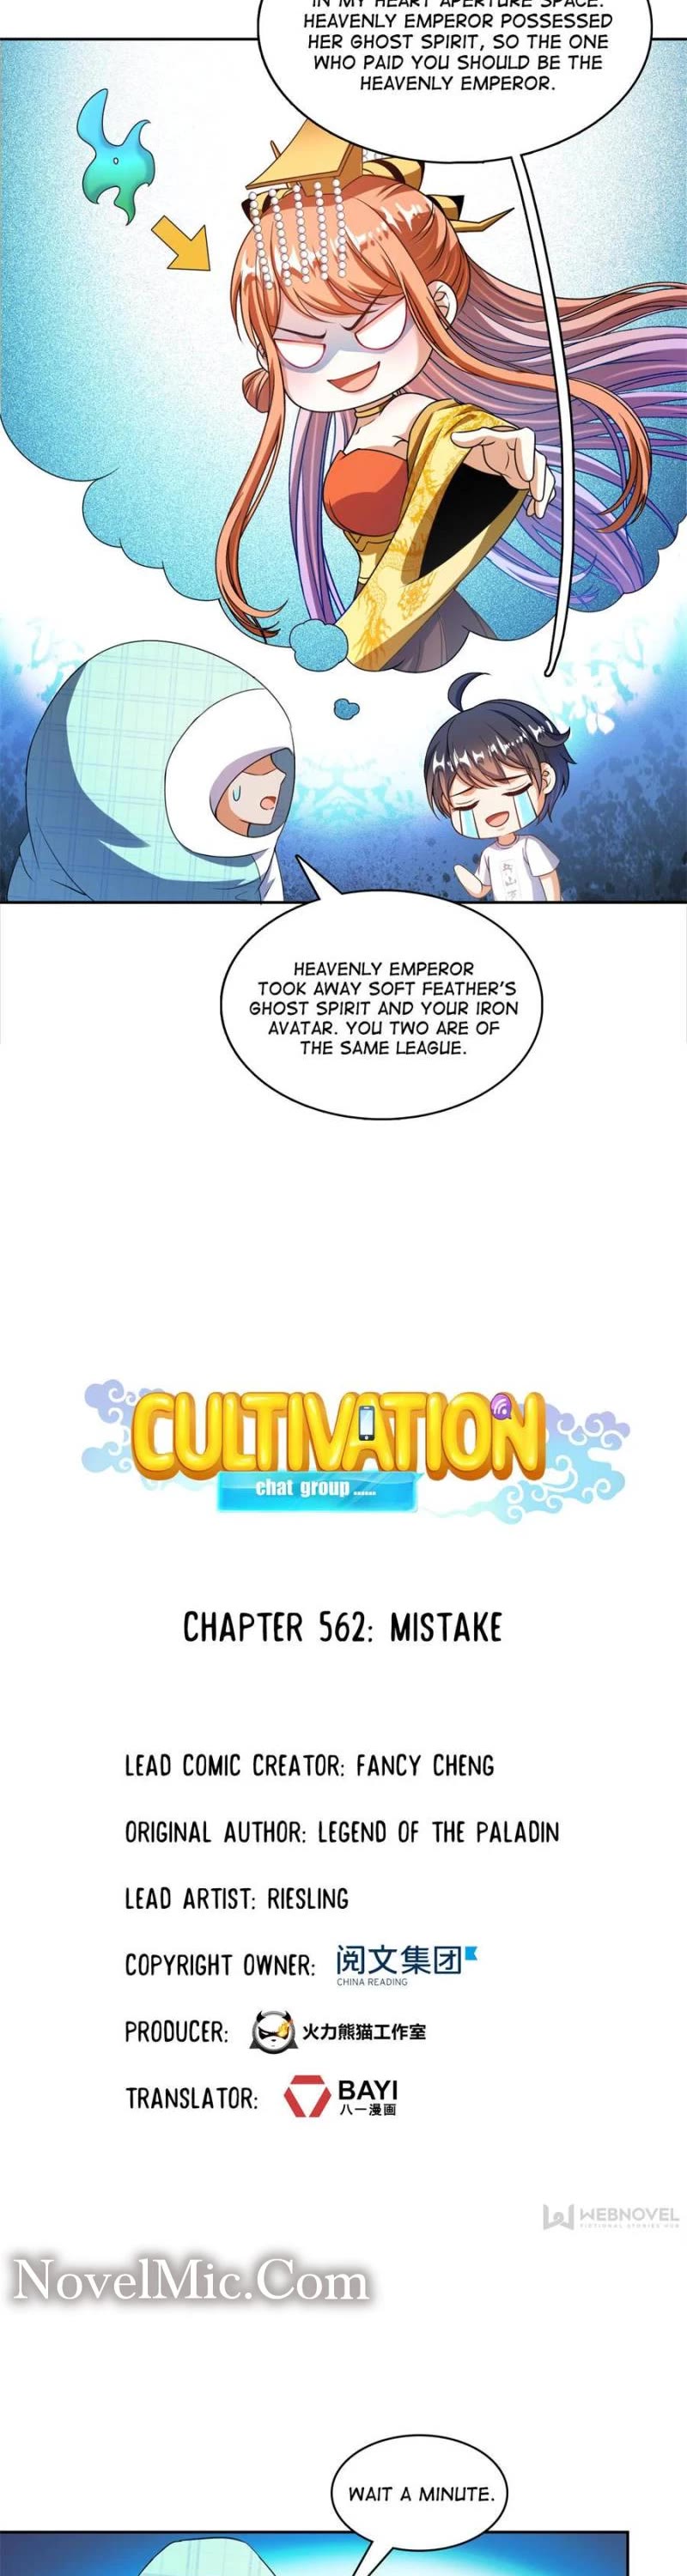 Cultivation Chat Group Chapter 562 - Picture 3